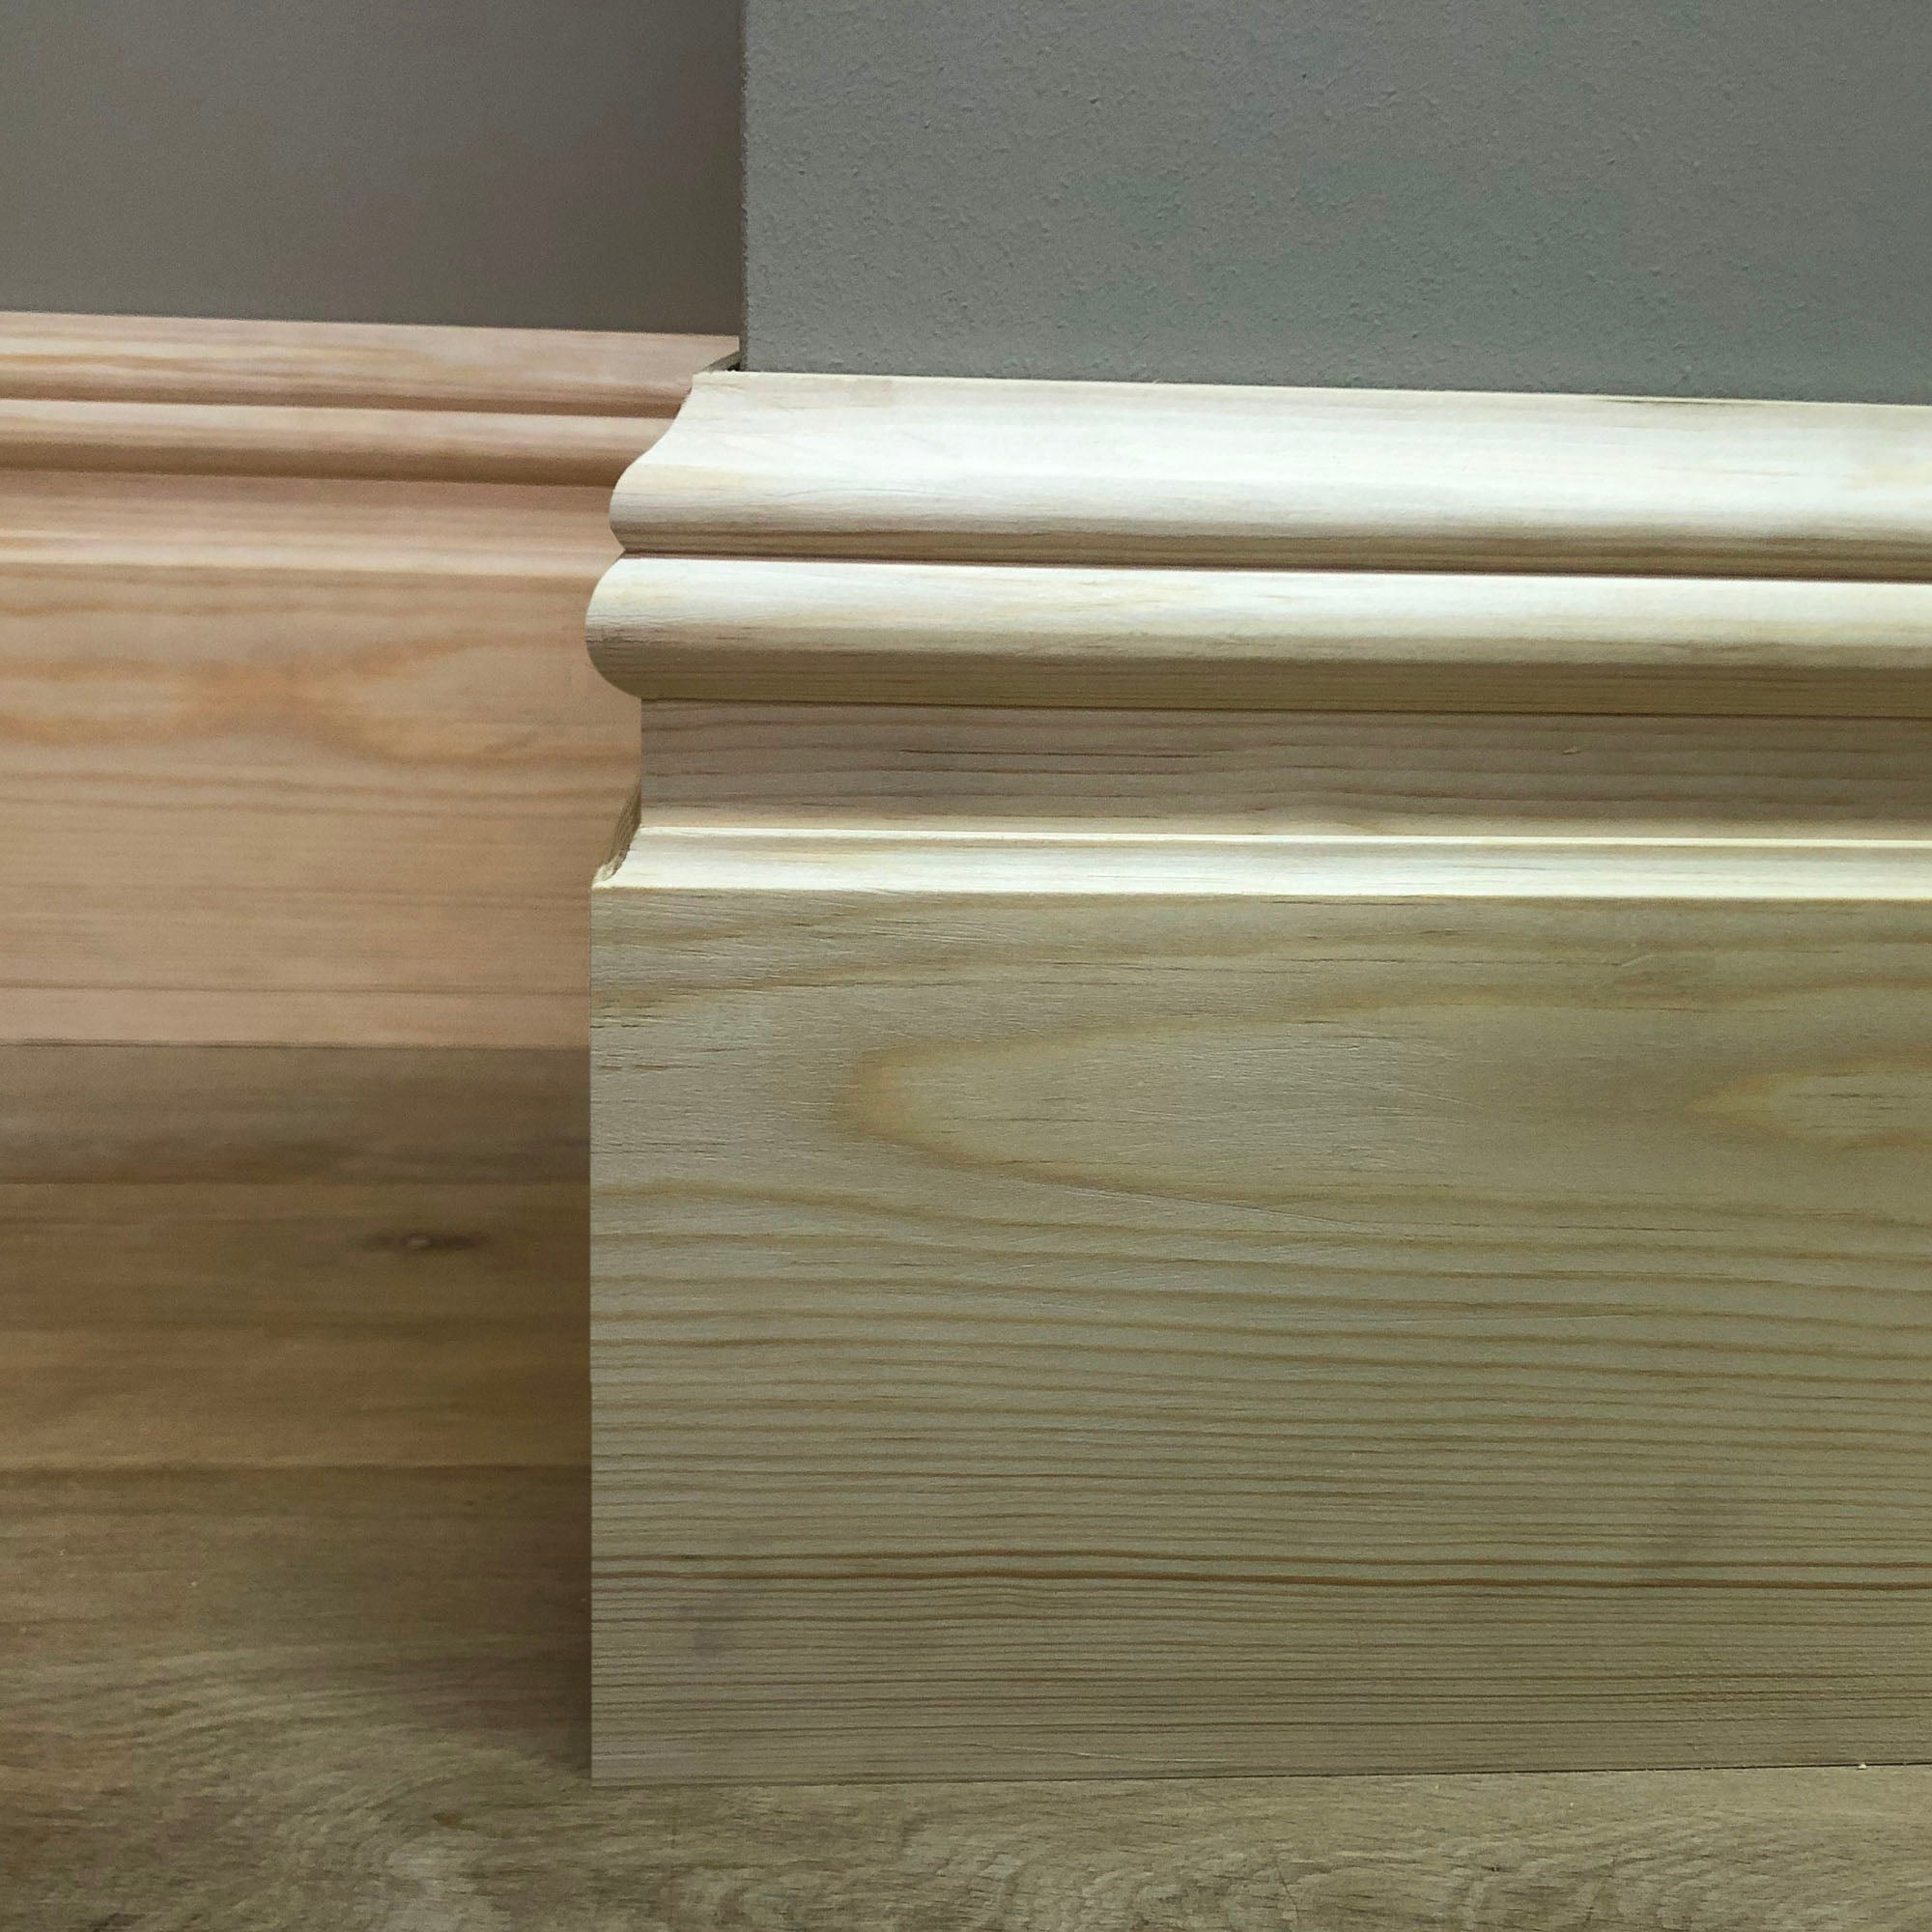 Skirting Board Height Guide | Choosing The Ideal Height - Skirting World